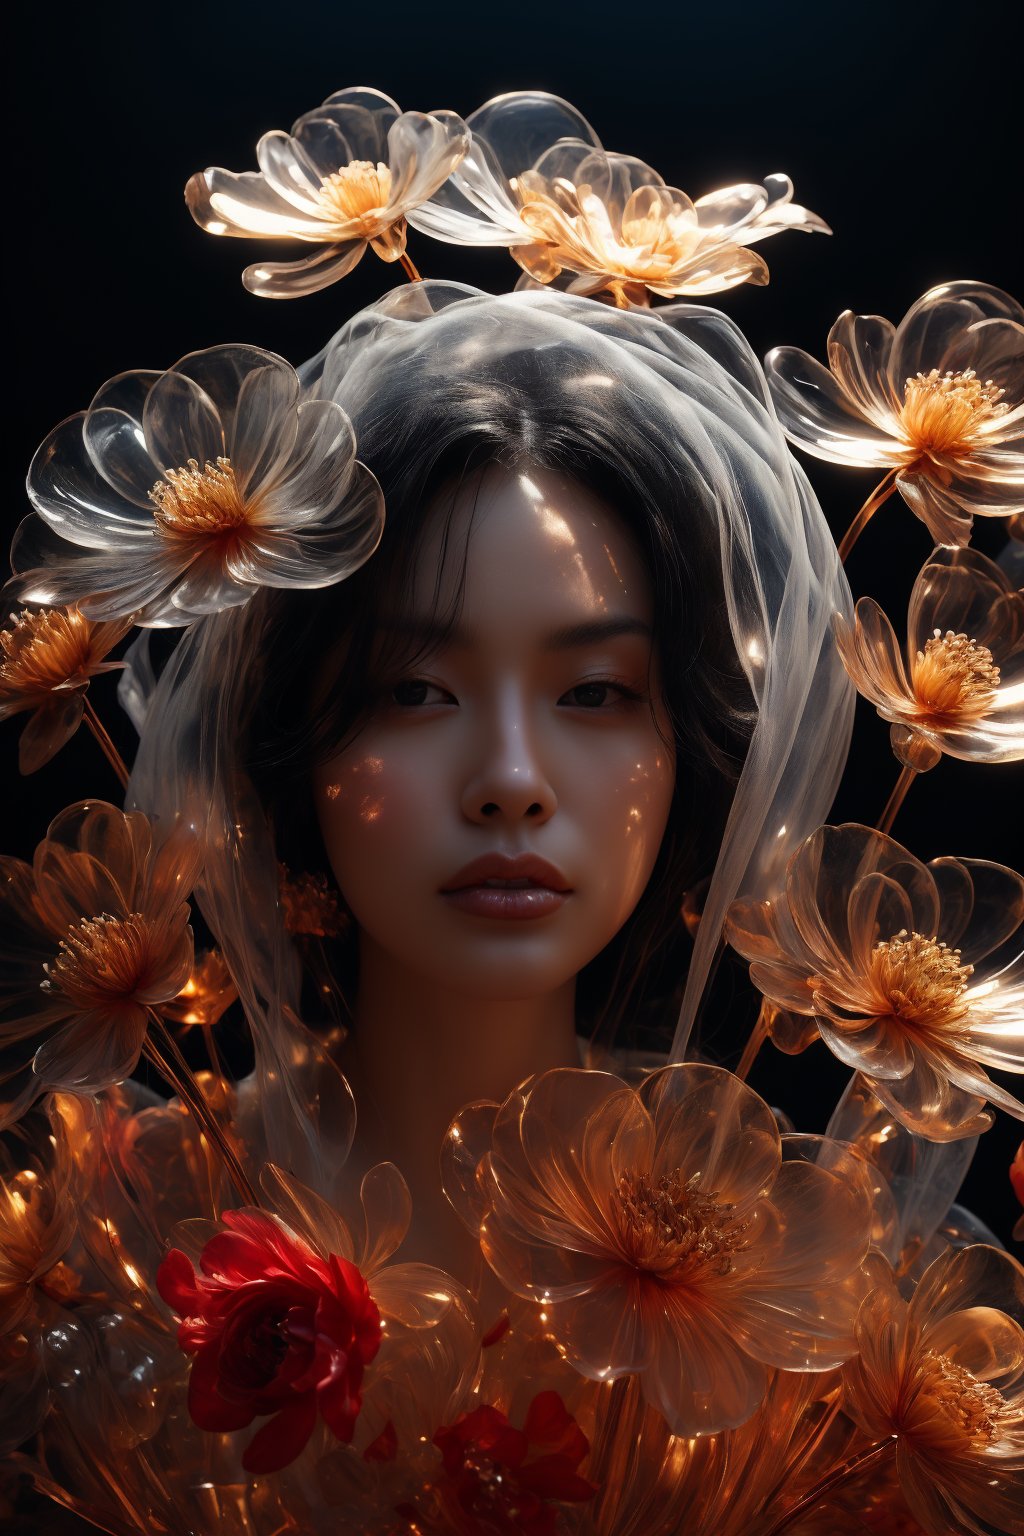 a close up of a side profile photograpy of an attractive korean beautiful model, wearing a head ornament like a mask ornated with flowers made of transparent glass, covering face, mouth cover made of transparent glass material, chic photography, dark studio, artistic model pose, magical, epic pose, large flower, size contrast, transparent flower, glass flower, (close up shot 1:1) lights shine on the face, dramatic shadows, epic shadows, cinematic lighting, dark photography, alluring pose, glass statue, attractive pose, view from below, looking upward, shot from below, perspective view, dynamic perspective, dynamic angle, dynamic pose, fashion editorial photography, master piece, hyper realistic, real skin, natural light, dreamy, surreal, enchanting, back lit photography, dramatic lighting, high contrast, studio photography, portrait photography, hourglass bodyshape, perky breast, sensual, large flowers, gigantic flowers, large petals, exotic flowers, monumental scale, museum quality, large glass statue, enormous glass flower,Transparent Glass Flowers